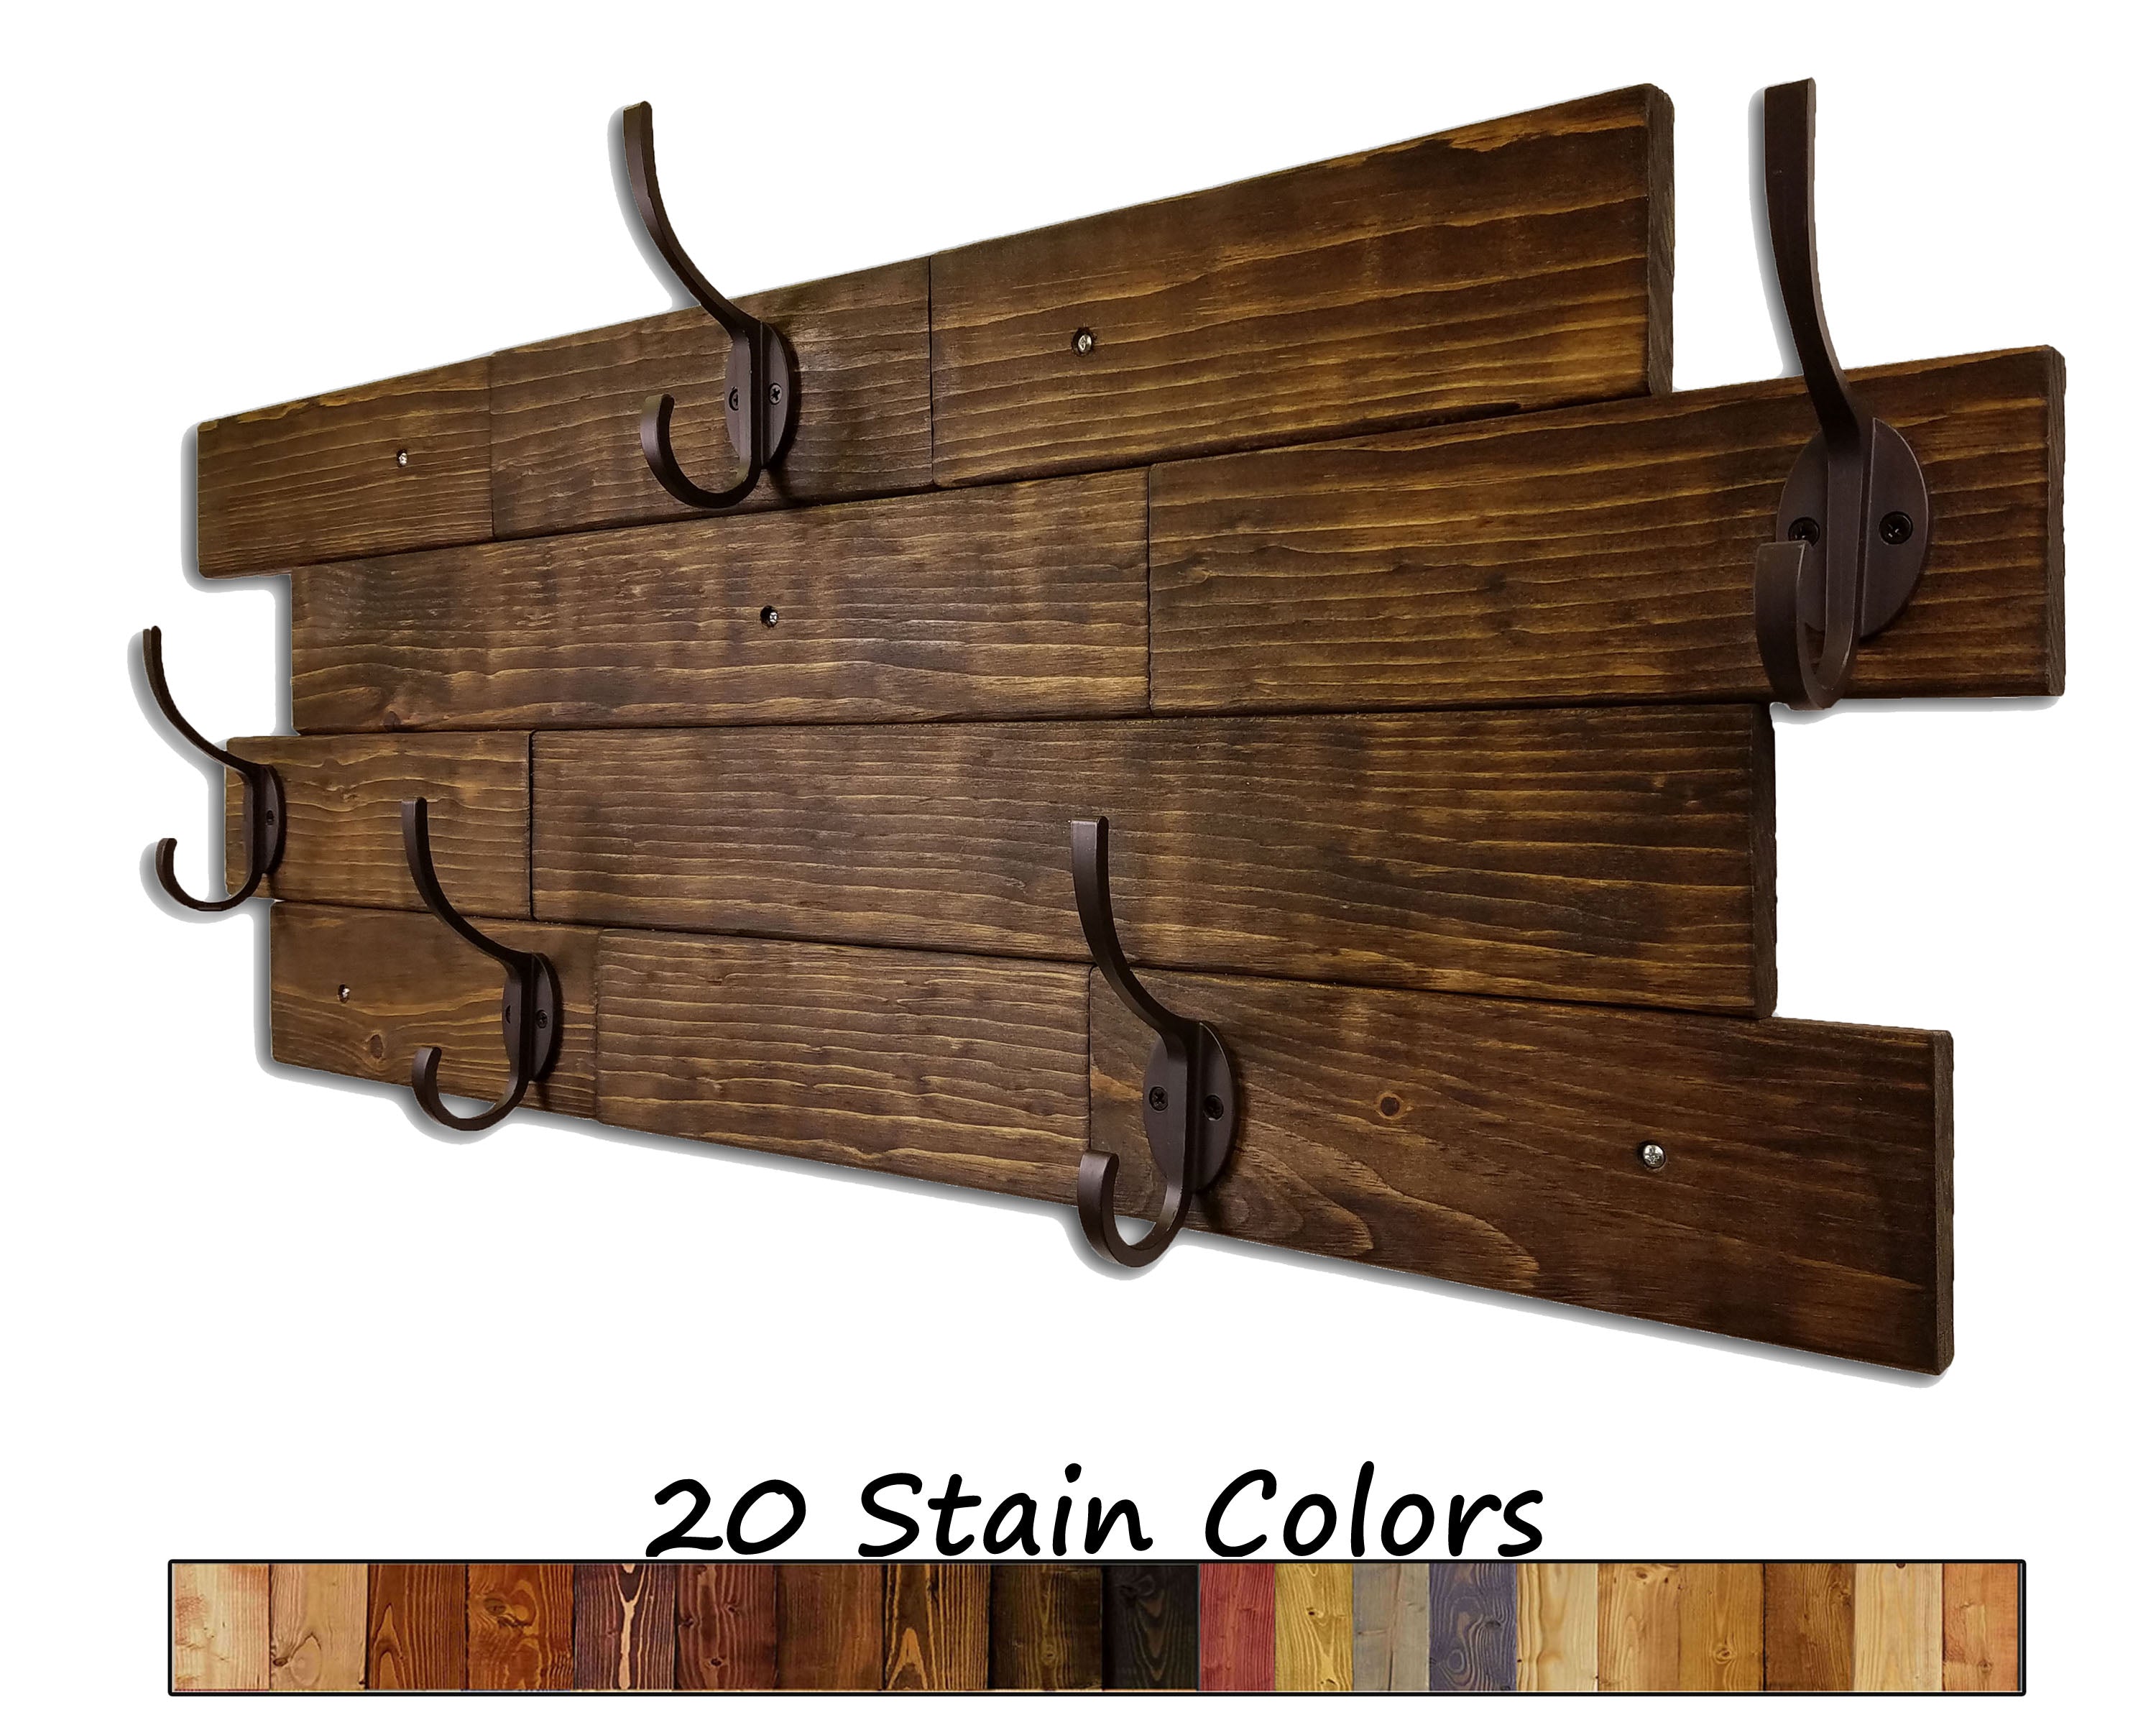 Frazier Farmhouse Wall Coat Hook Rack, 20 Colors & 5 Hook Finishes by Renewed Decor